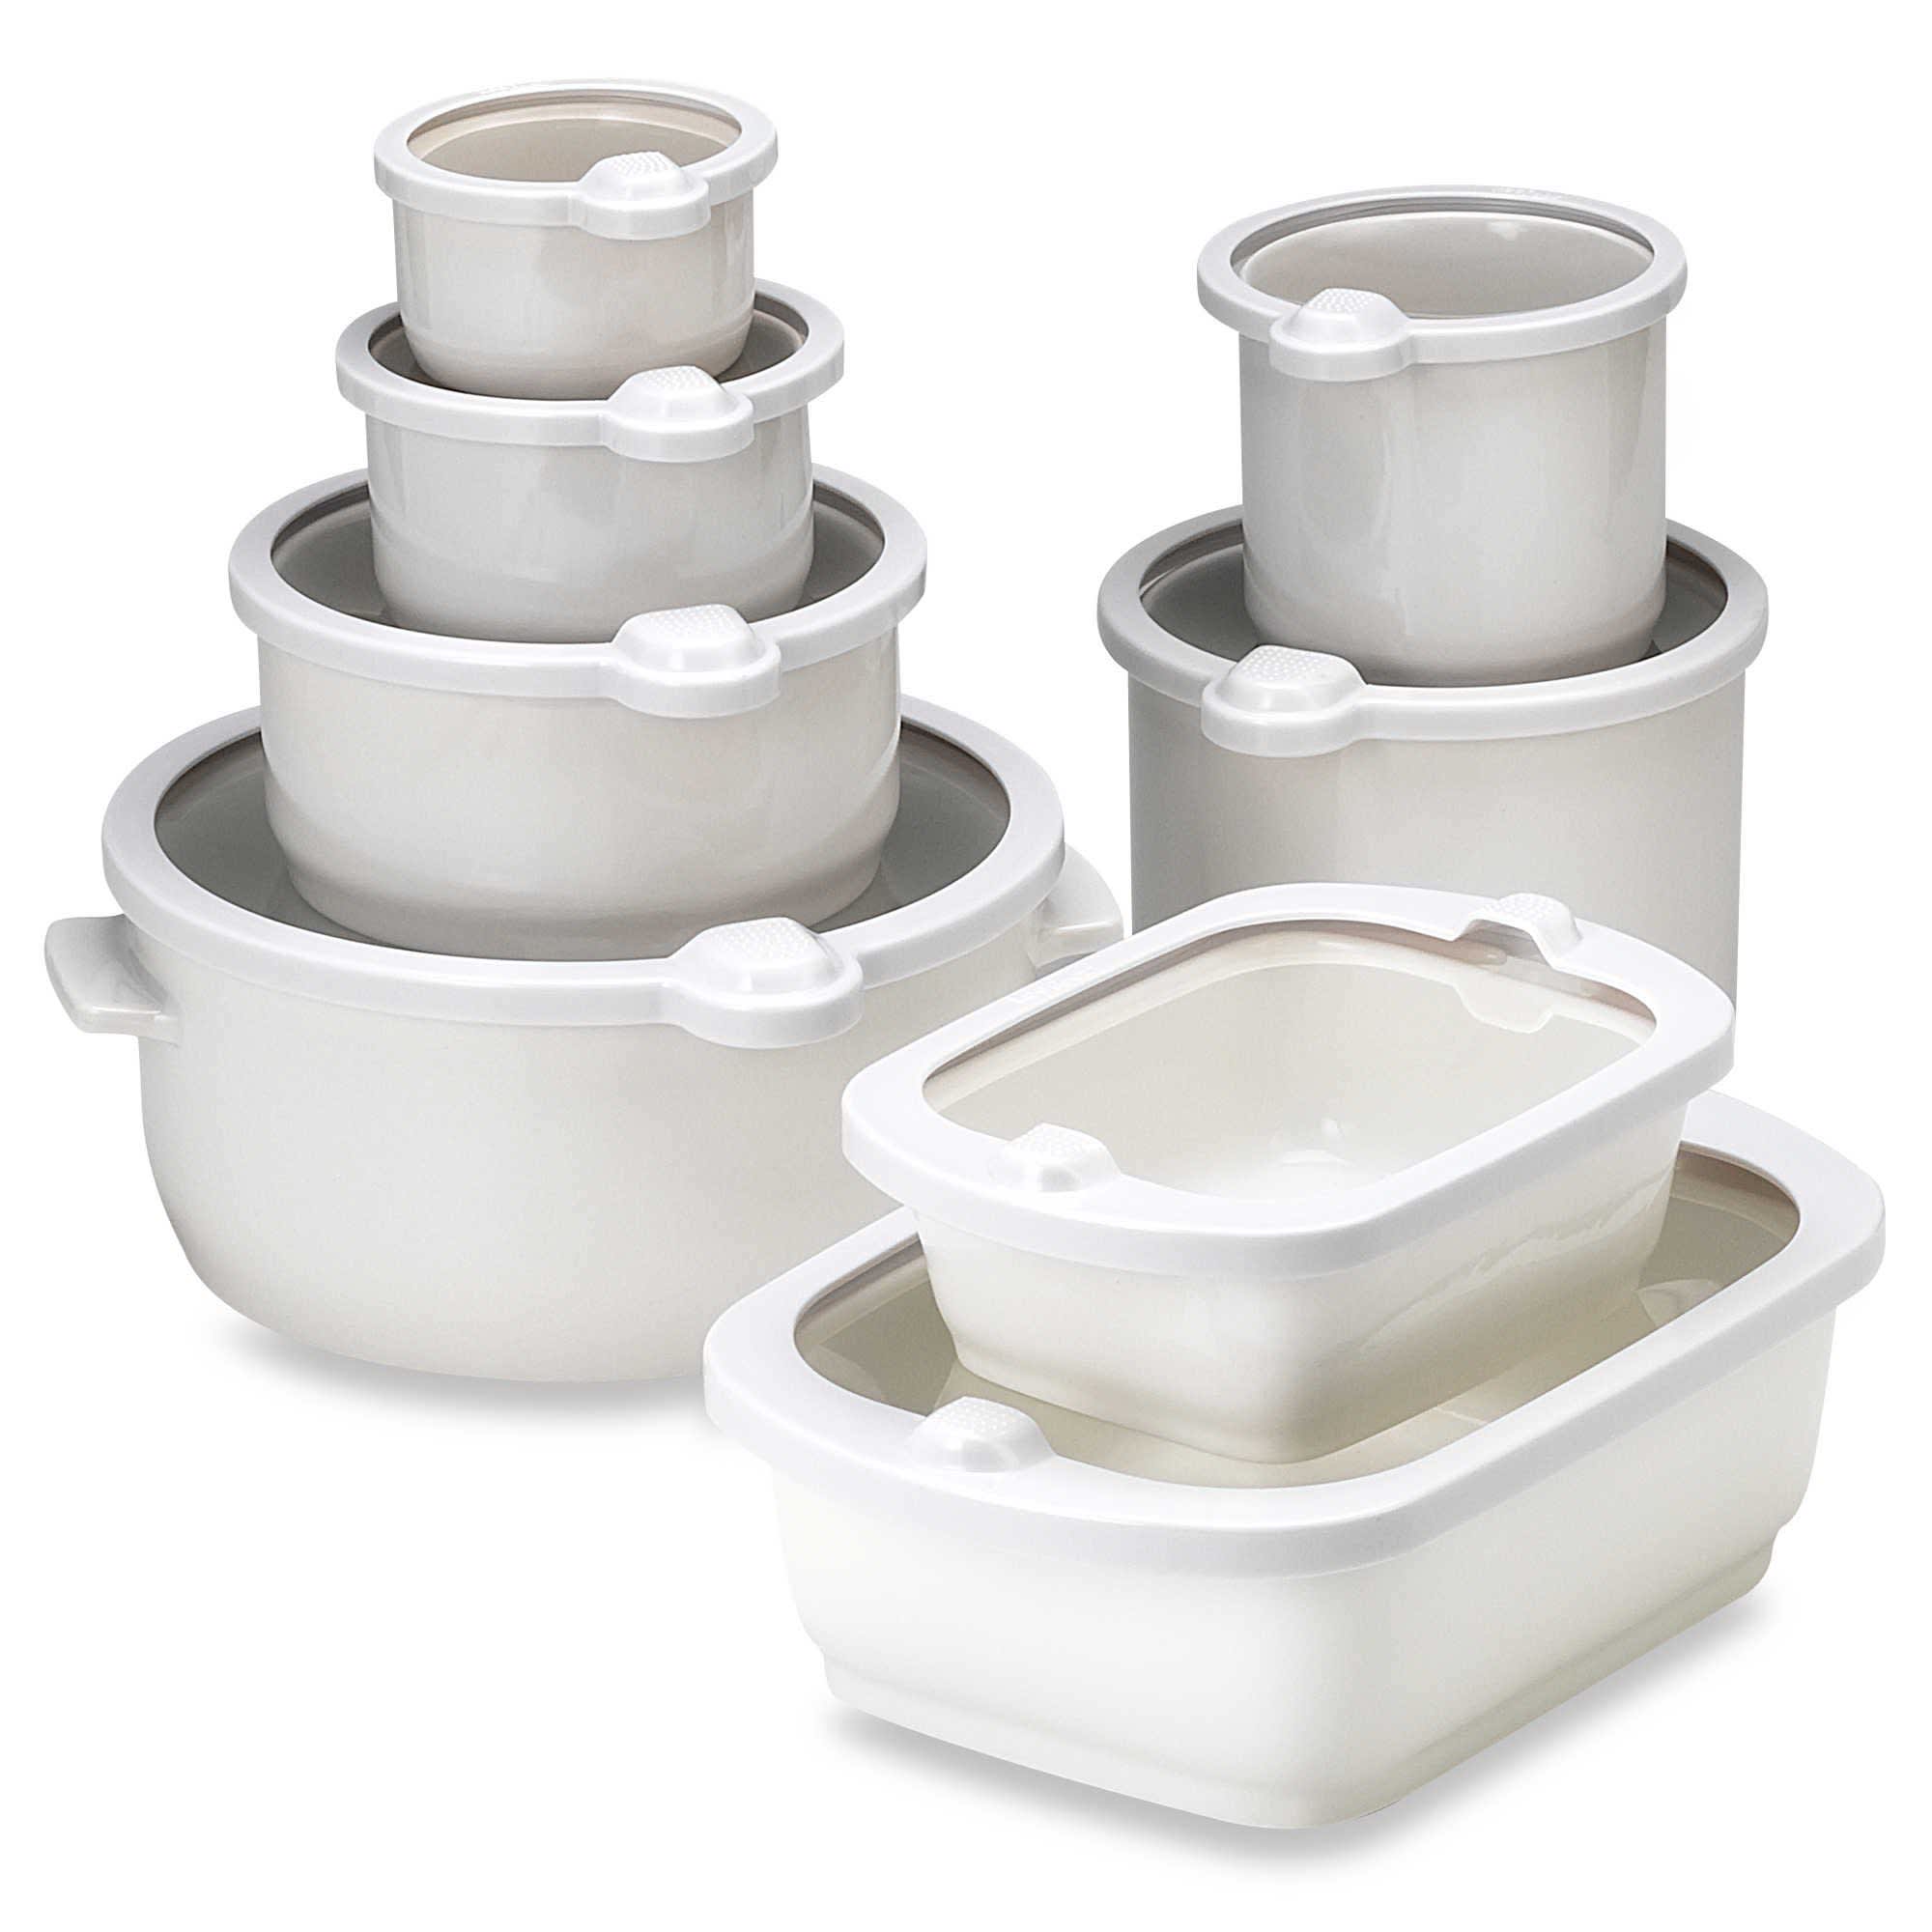 7 Extra-Large Food Storage Containers for Make-Ahead Meals